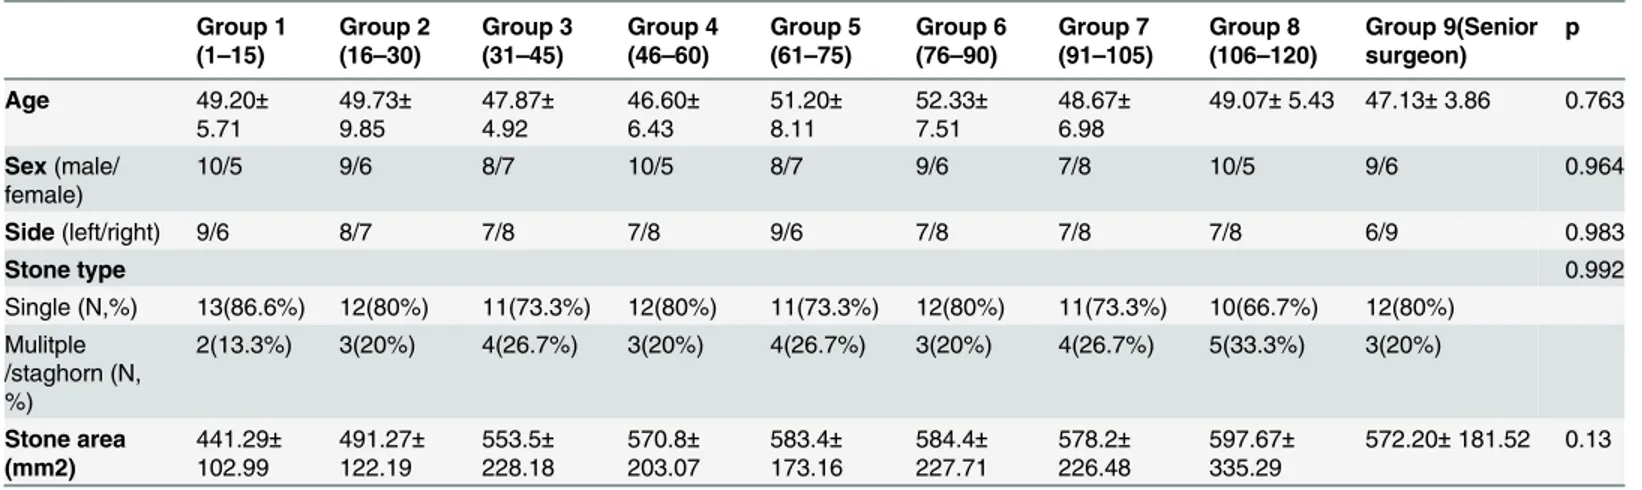 Table 1. Demographic characteristics data of patients according to patients’ group.